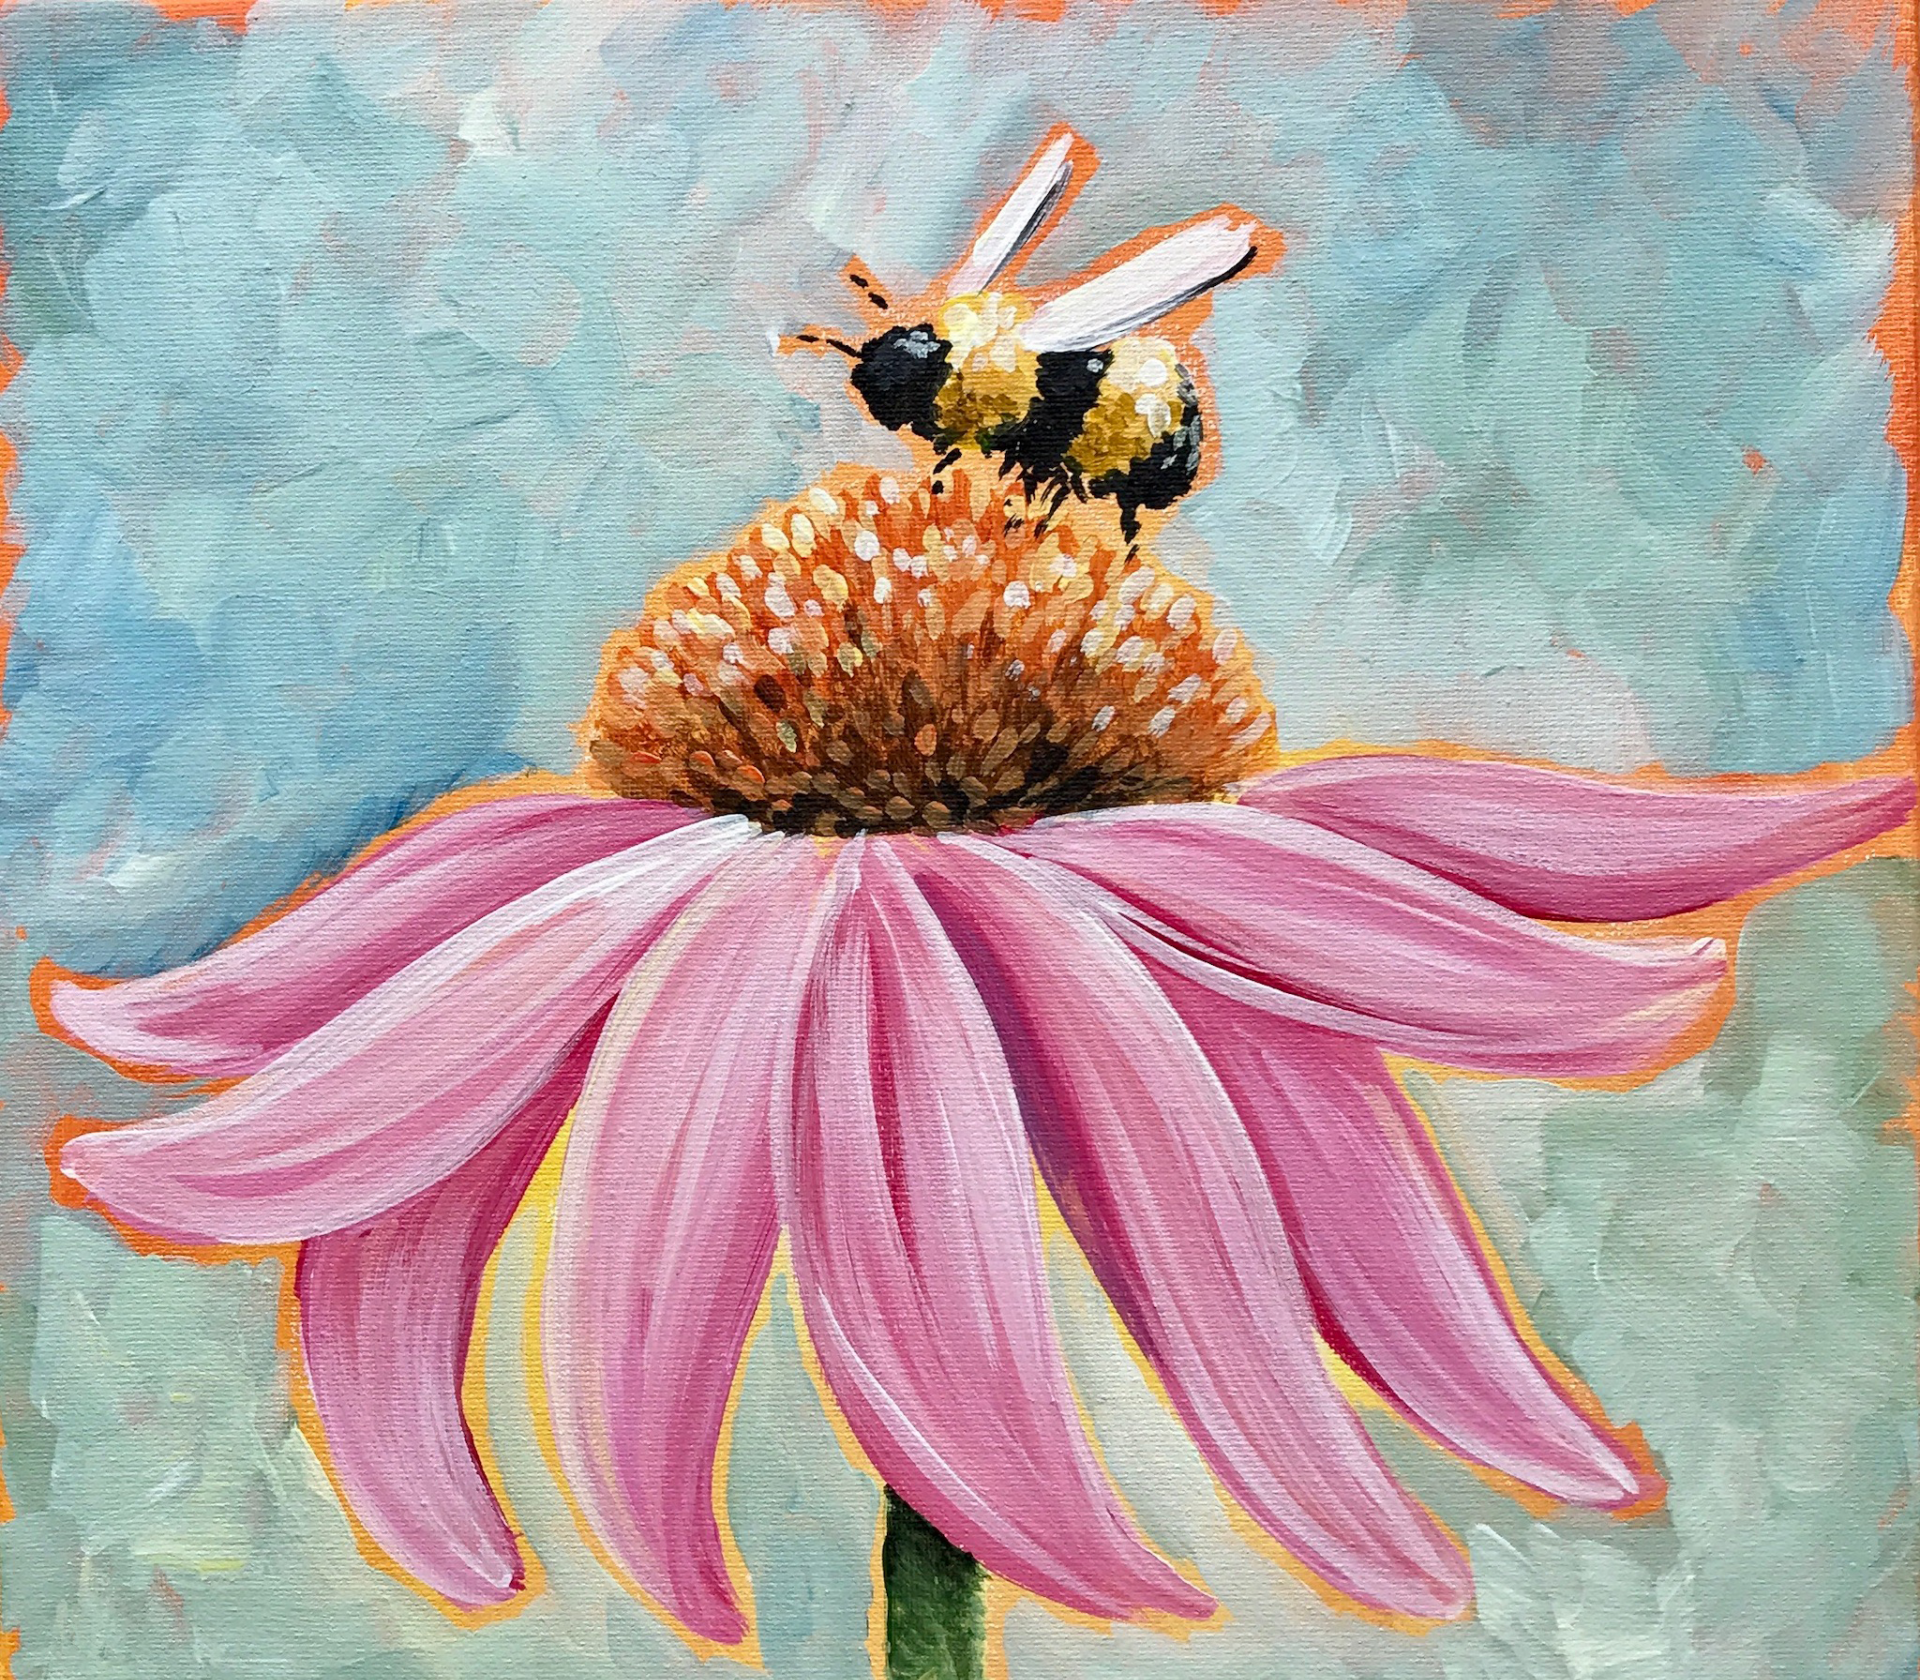 Bee Happy - Paint and Sip classes in Jupiter, FL for Team Building events and Date Nights near West Palm Beach